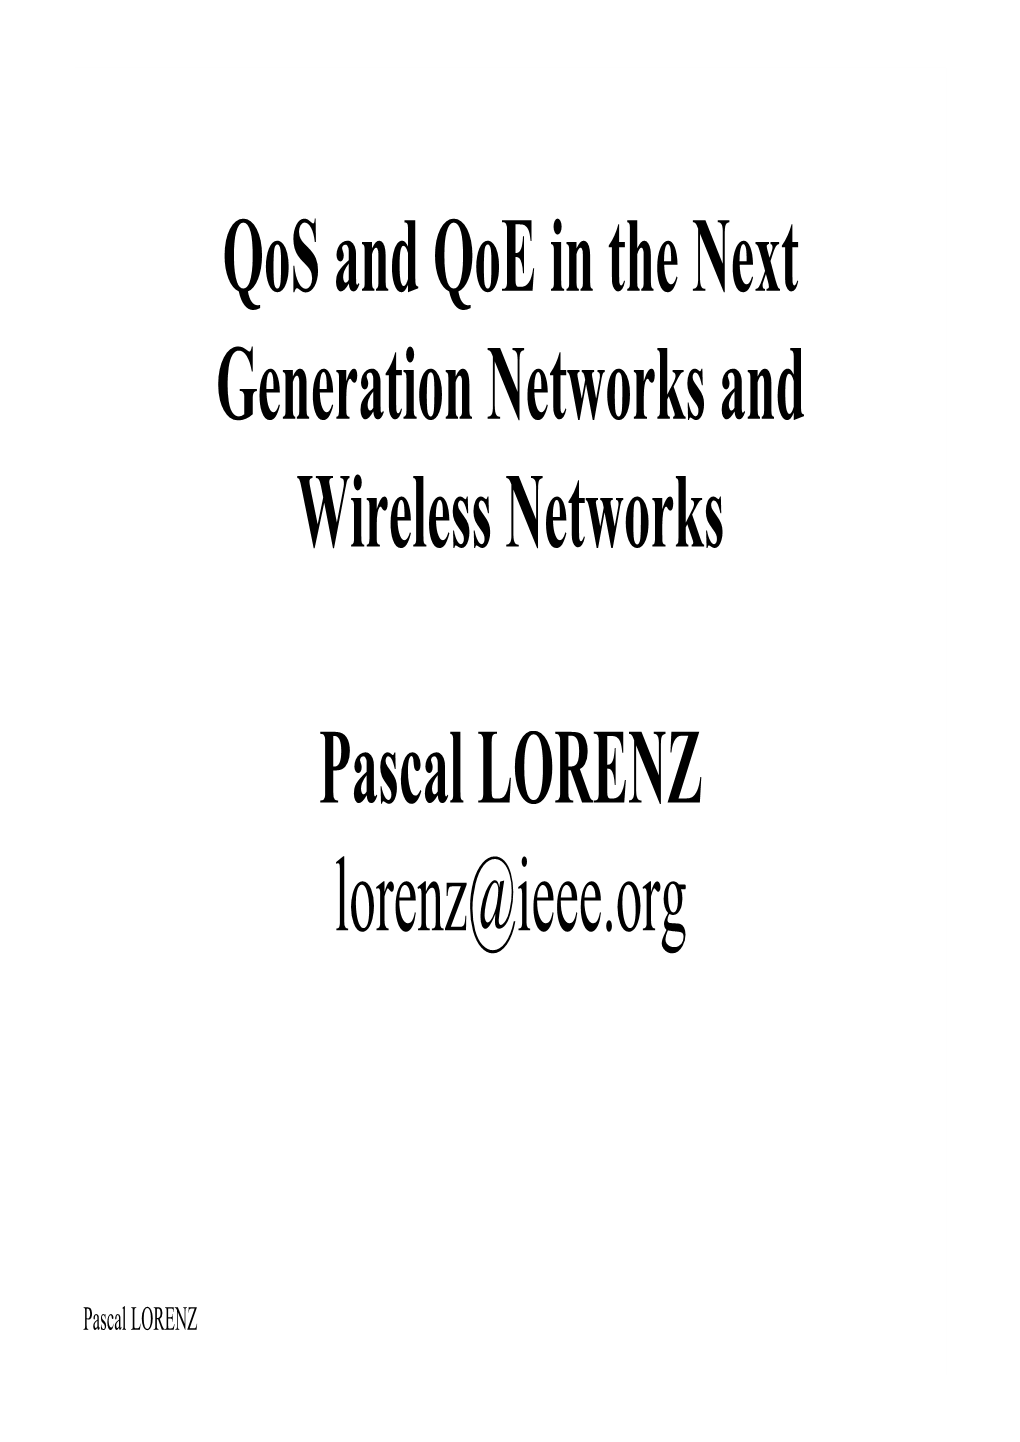 Qos and Qoe in the Next Generation Networks and Wireless Networks